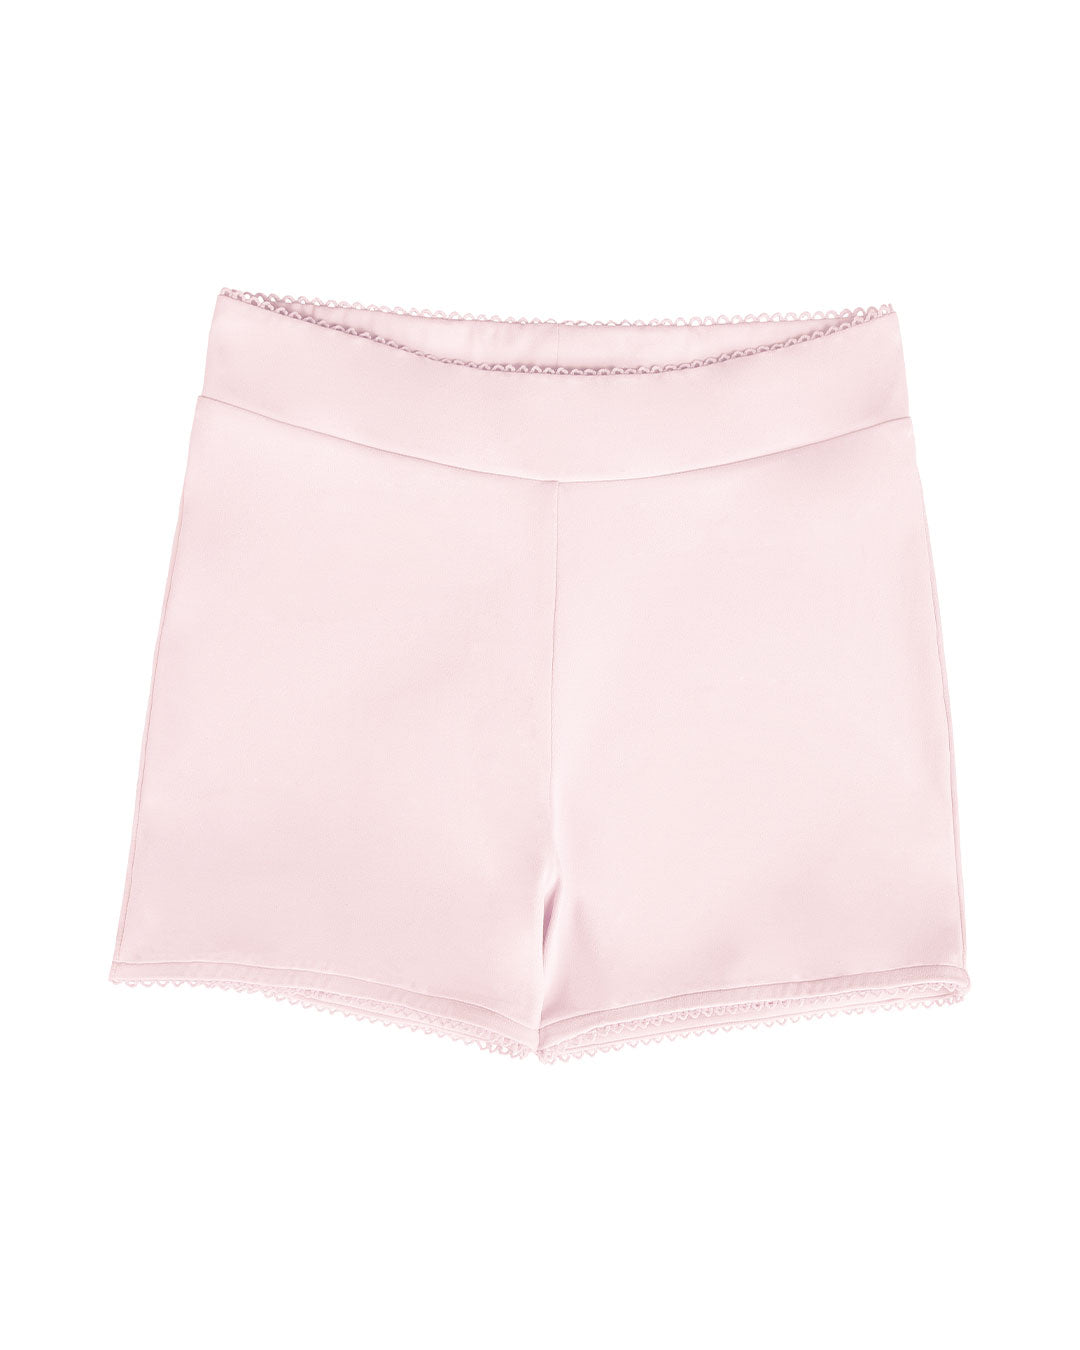 Lace Stretch Shorts - Rose